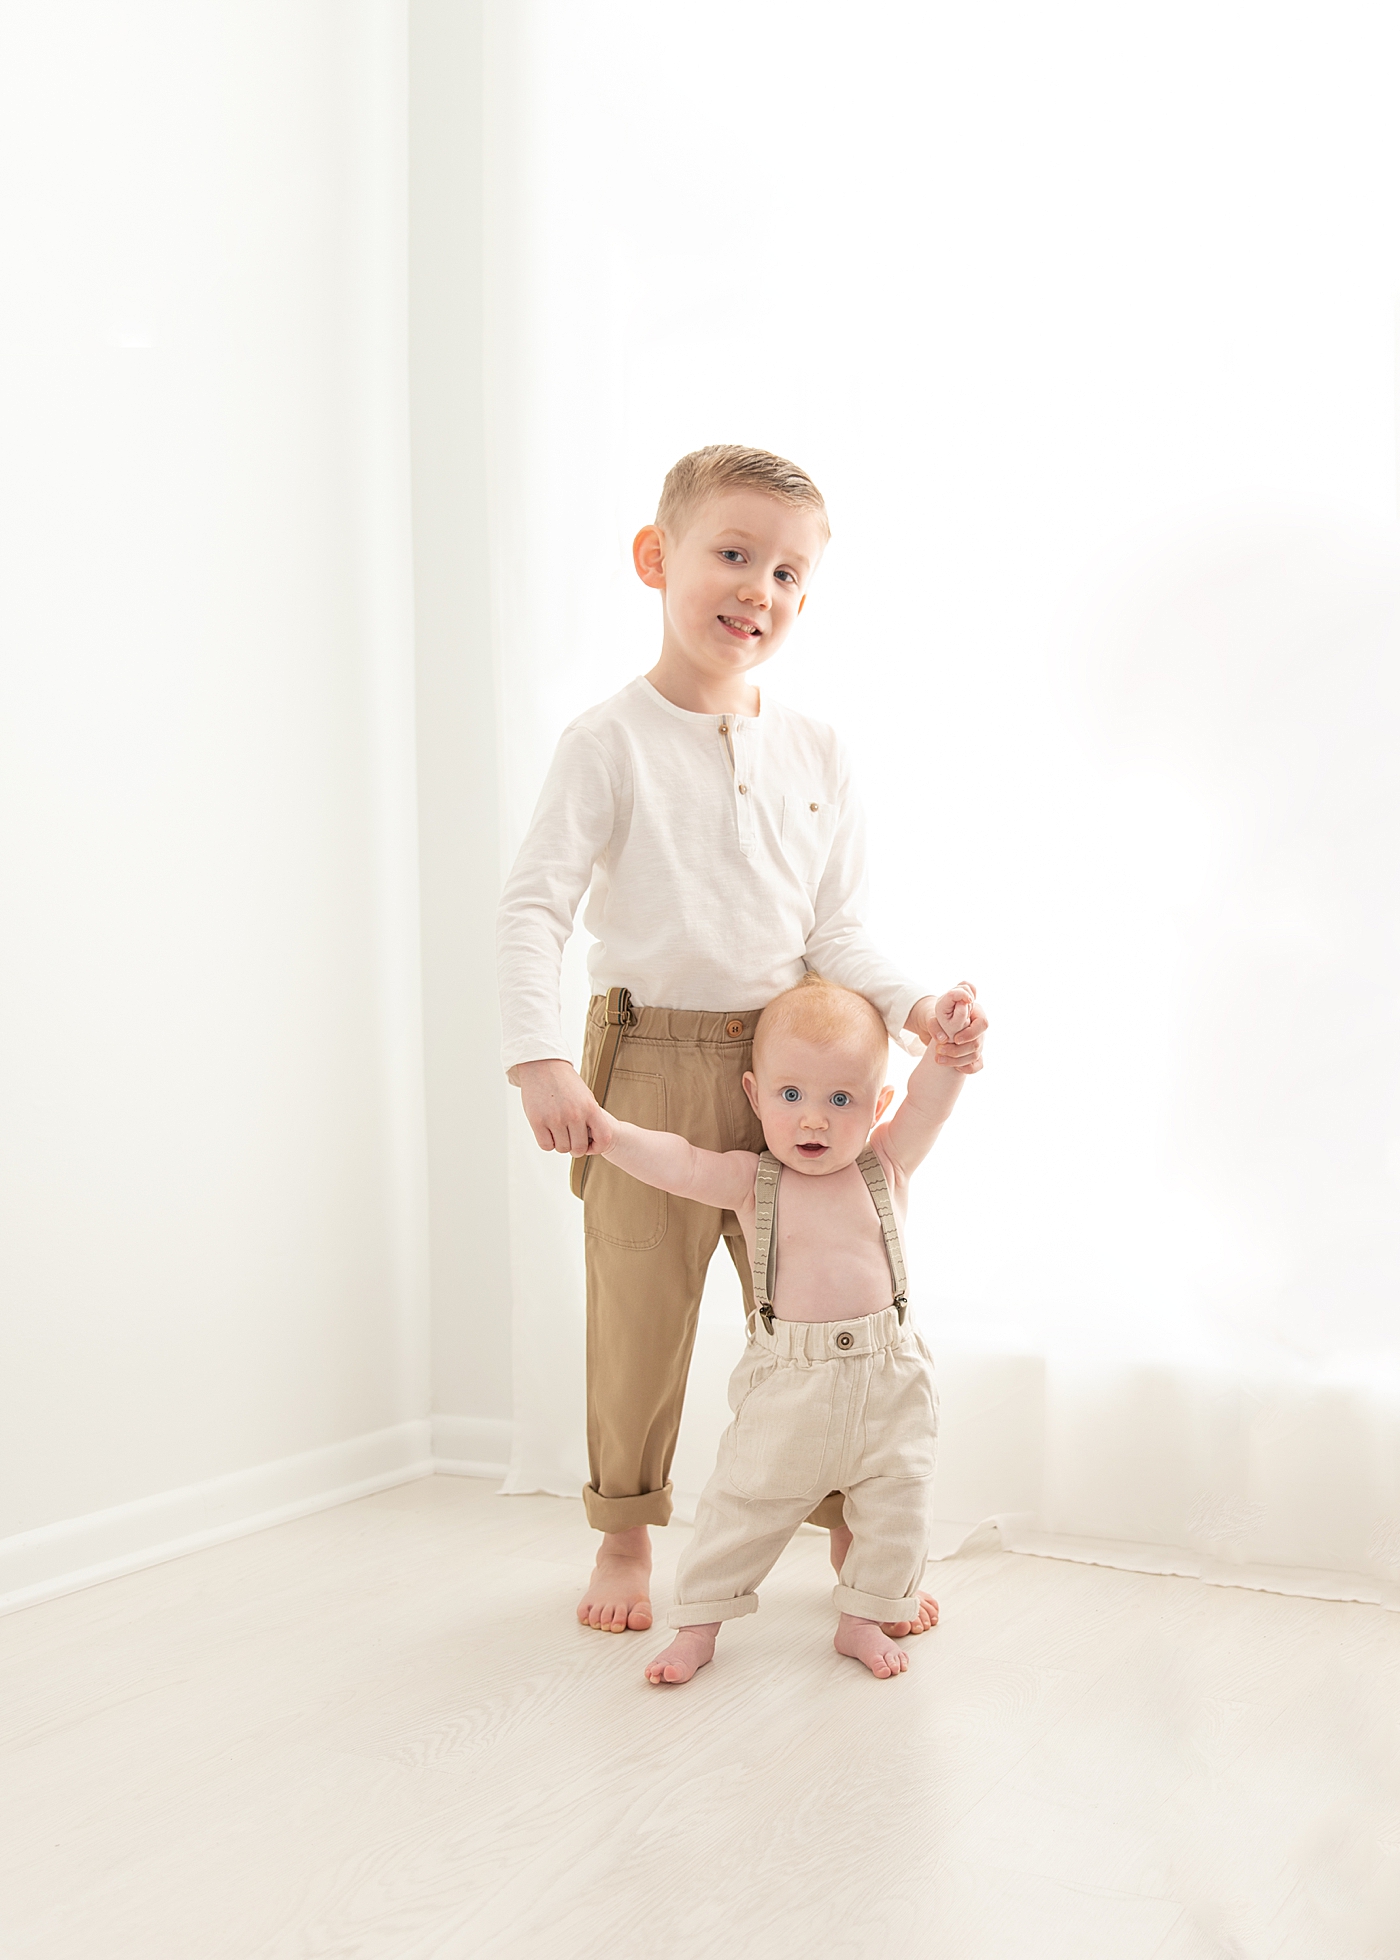 Photos of two brothers in Chagrin Falls studio. Photo by Rachel Brookes Photography.